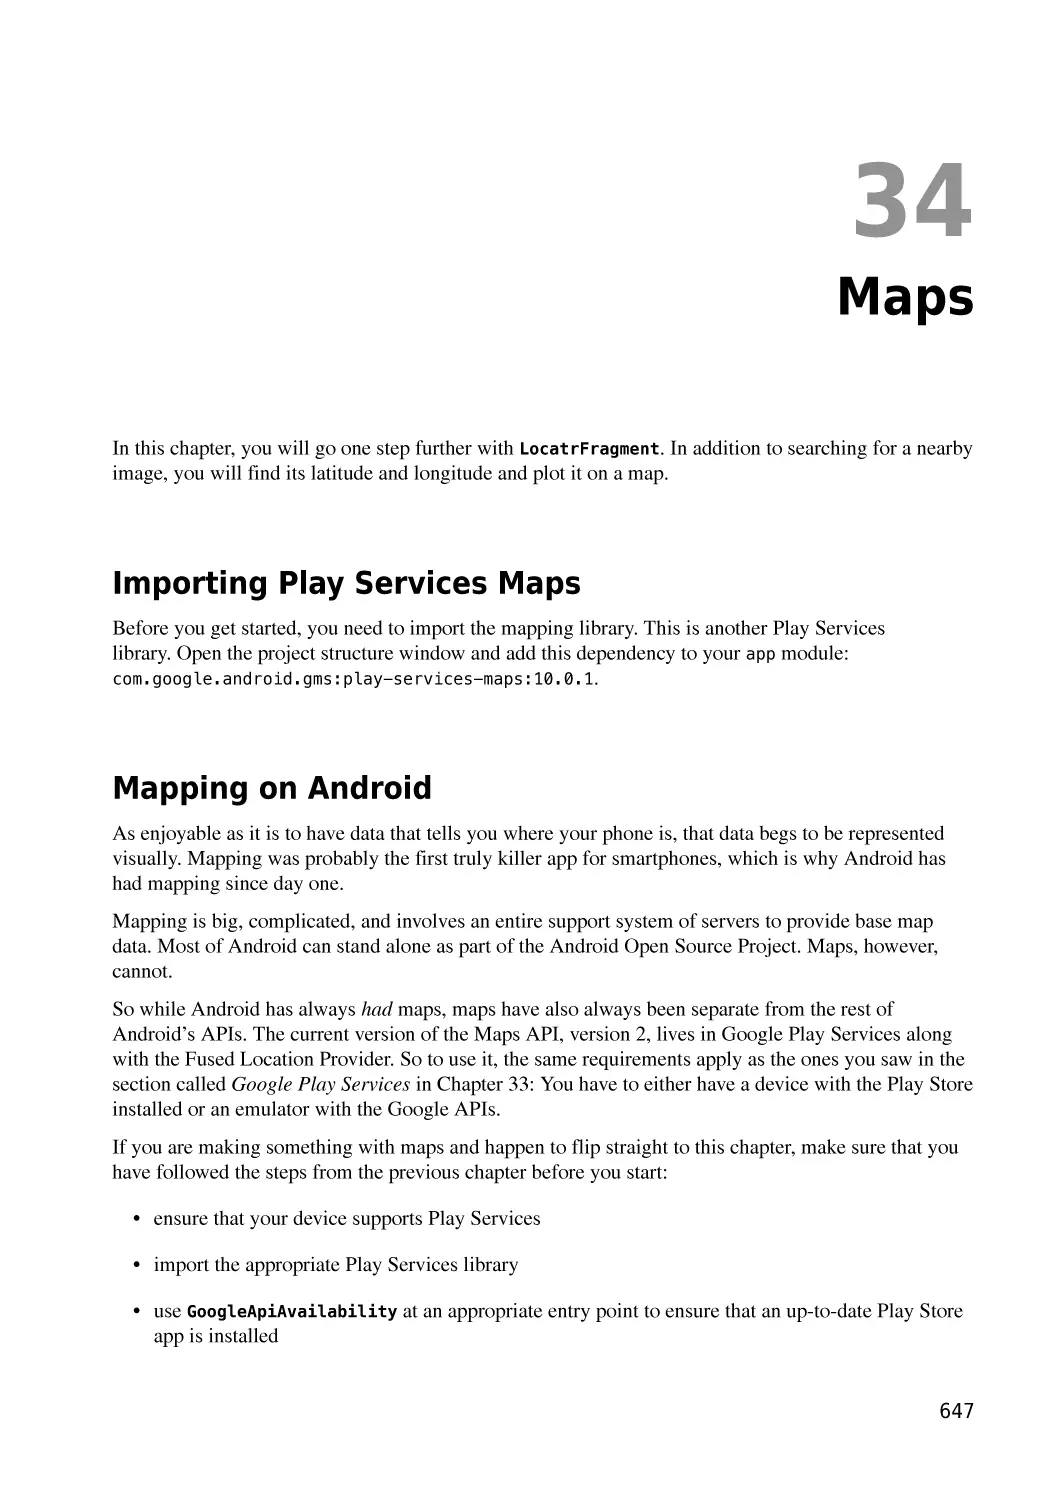 Chapter 34  Maps
Importing Play Services Maps
Mapping on Android